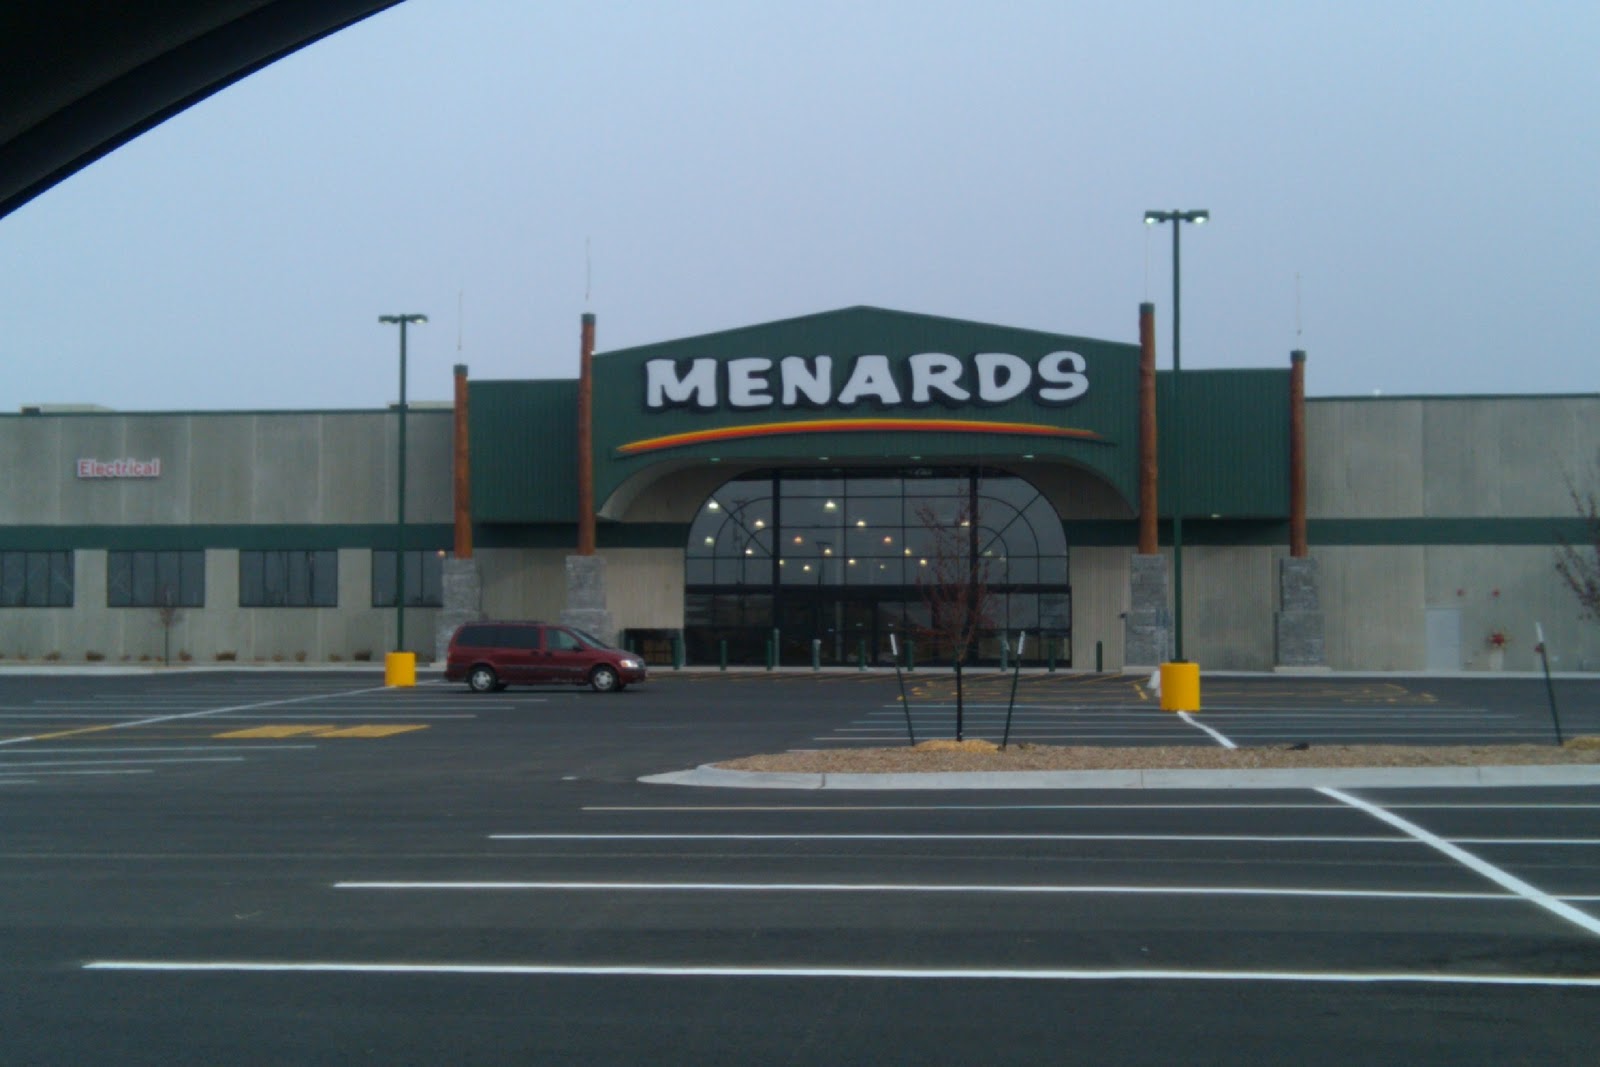 Rebuilding Place in the Urban Space: Workforce housing and Menards